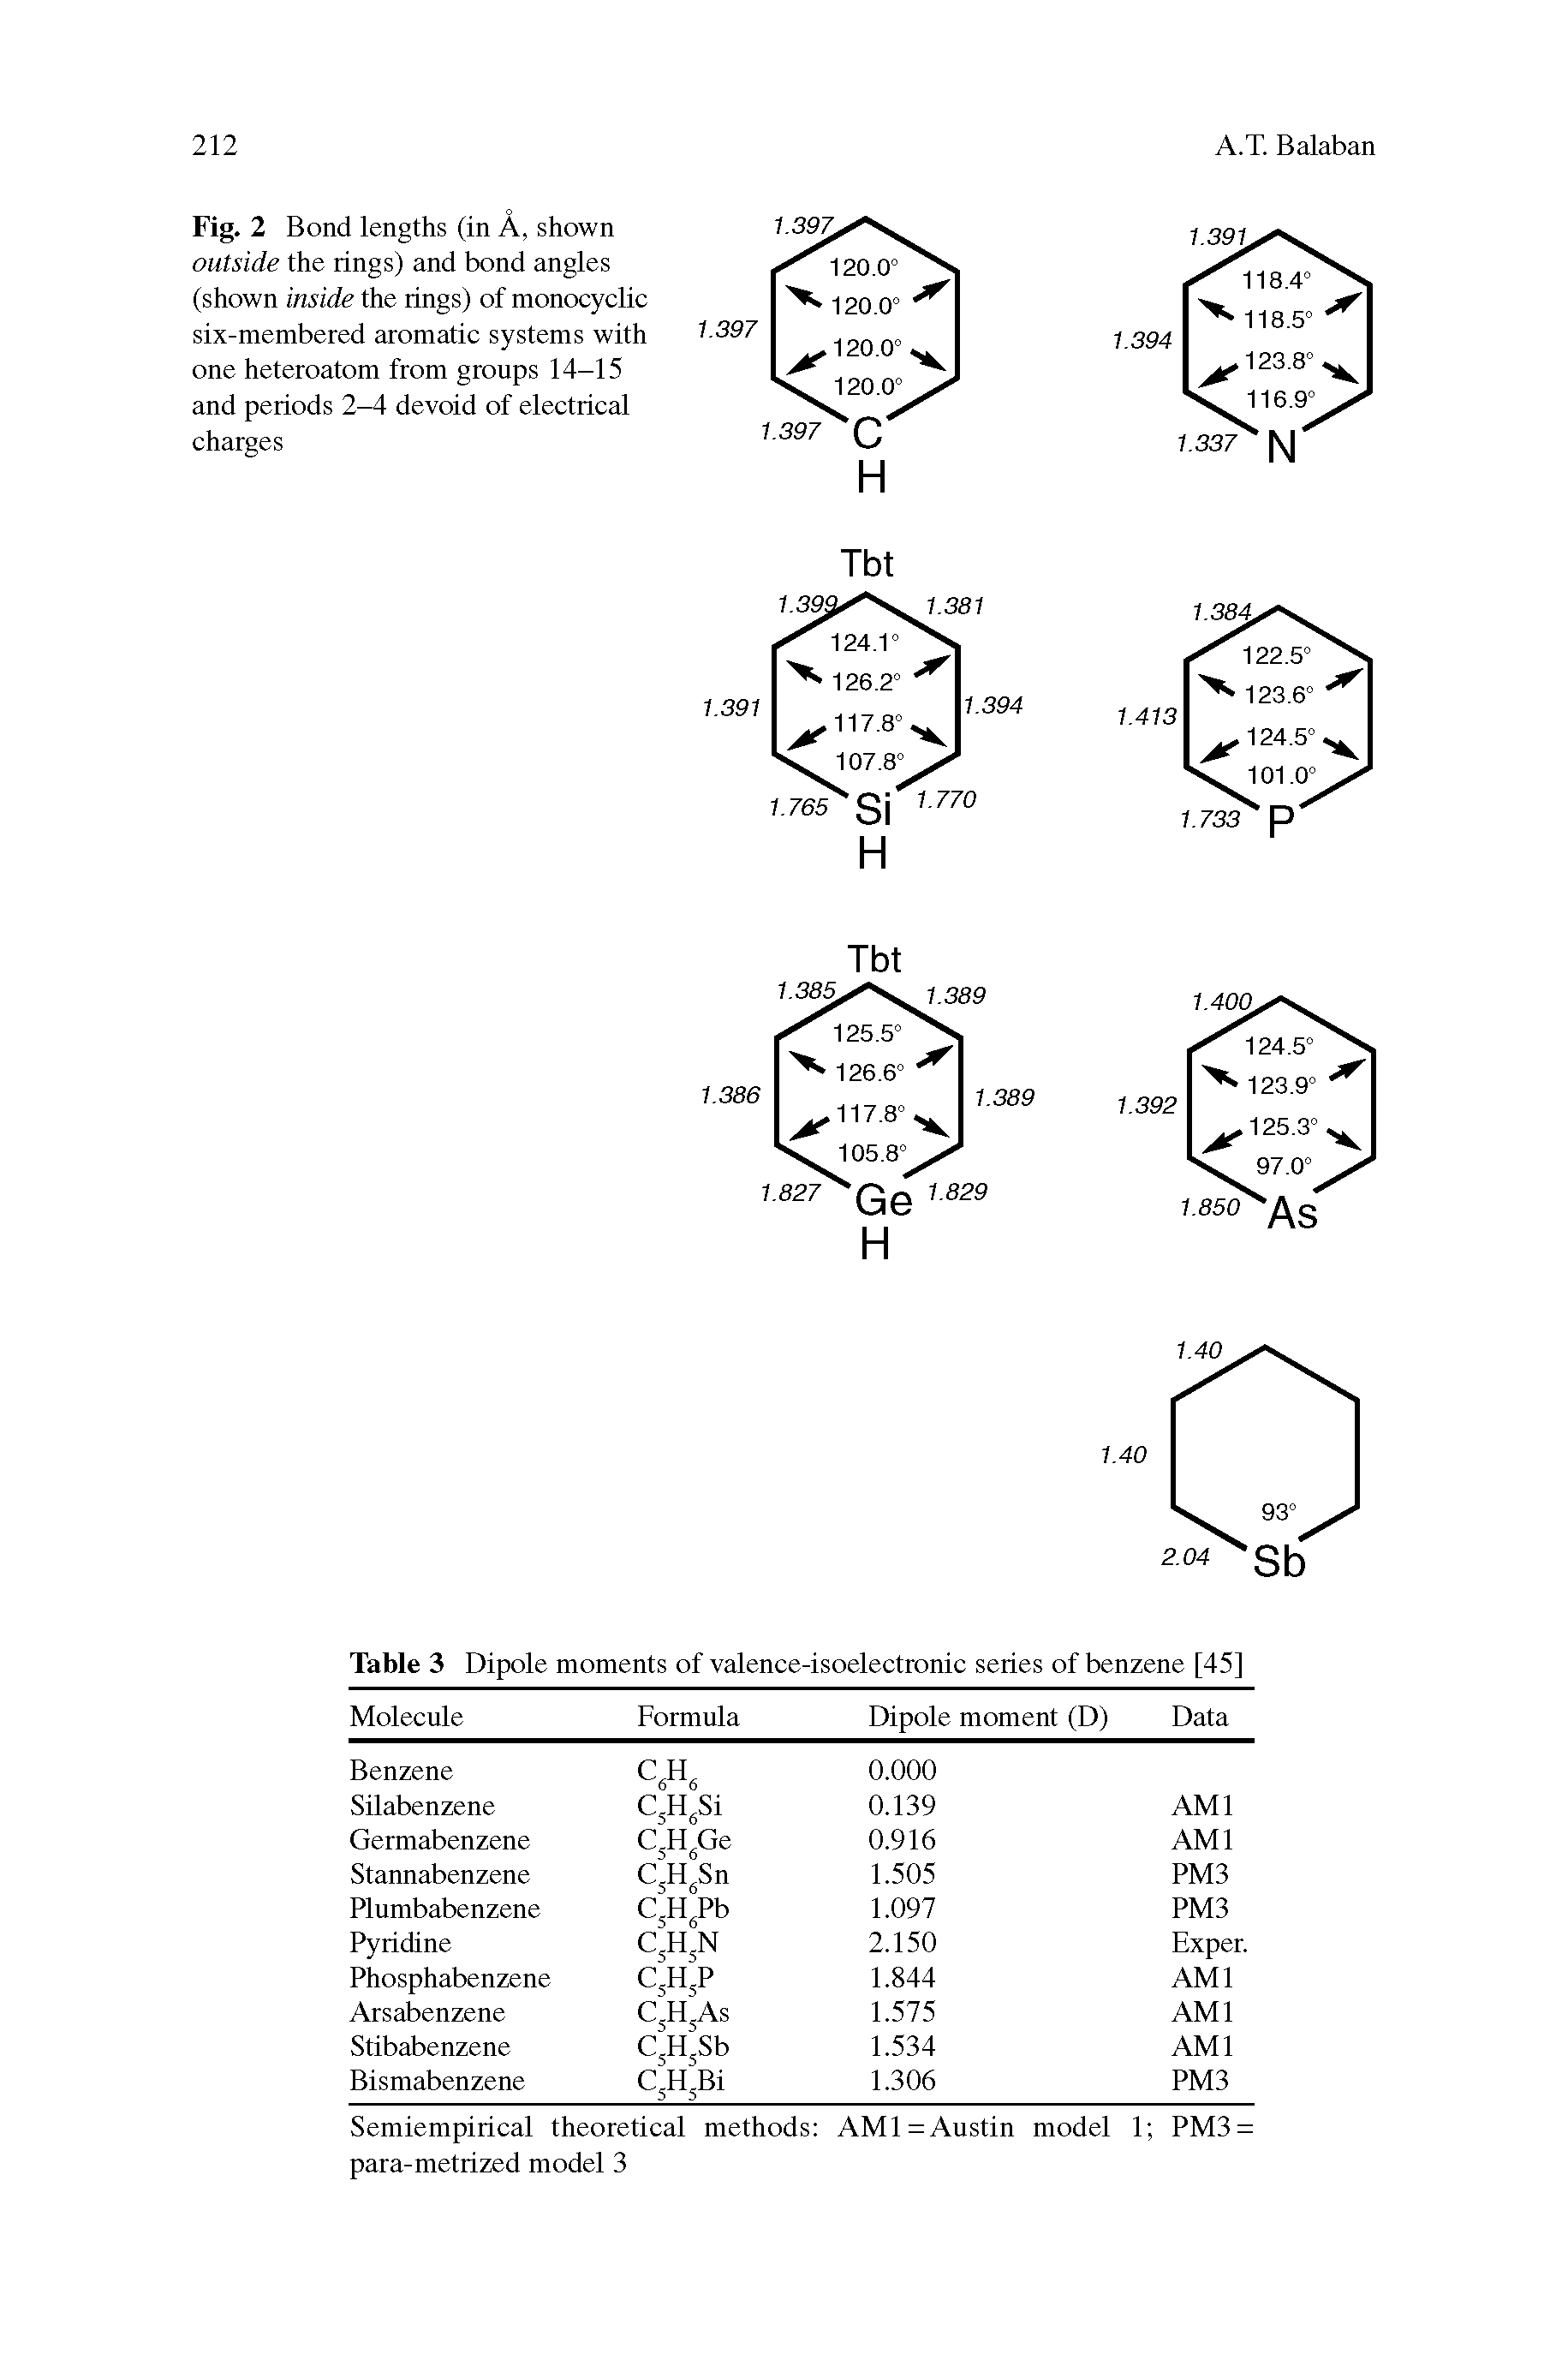 Fig. 2 Bond lengths (in A, shown outside the rings) and bond angles (shown inside the rings) of monocyclic six-membered aromatic systems with one heteroatom from groups 14-15 and periods 2-4 devoid of electrical charges...